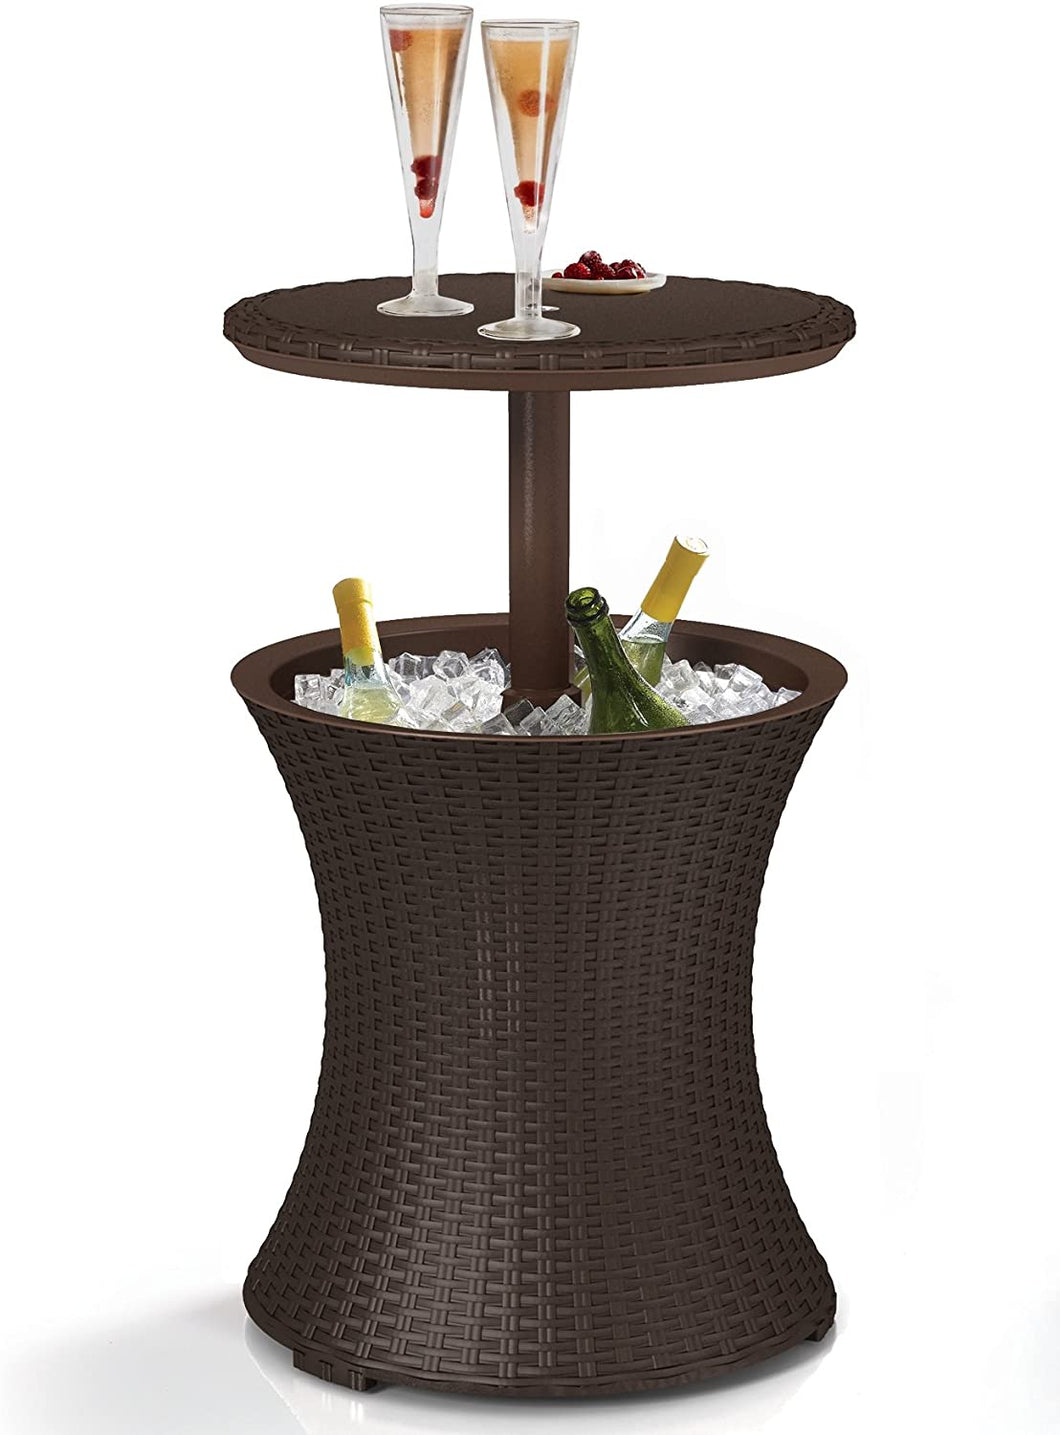 Pacific Cool Bar Outdoor Patio Furniture and Hot Tub Side Table with 7.5 Gallon Beer and Wine Cooler, Brown